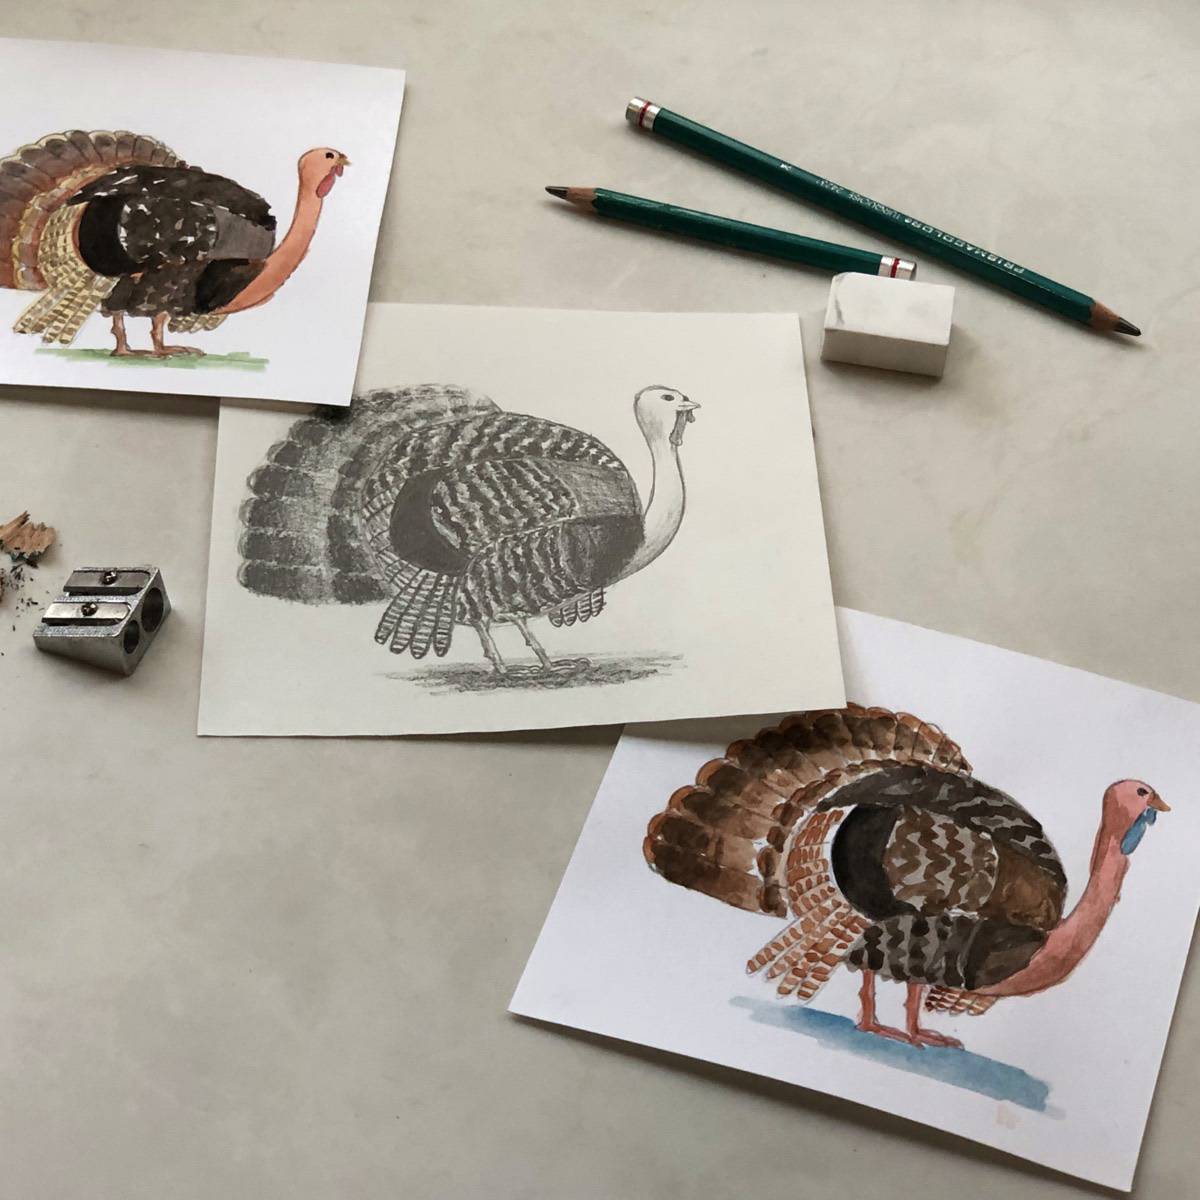 Pencil drawing of a realistic turkey with several watercolor paintings of turkeys with drawing pencils, an eraser, and a pencil sharpener.